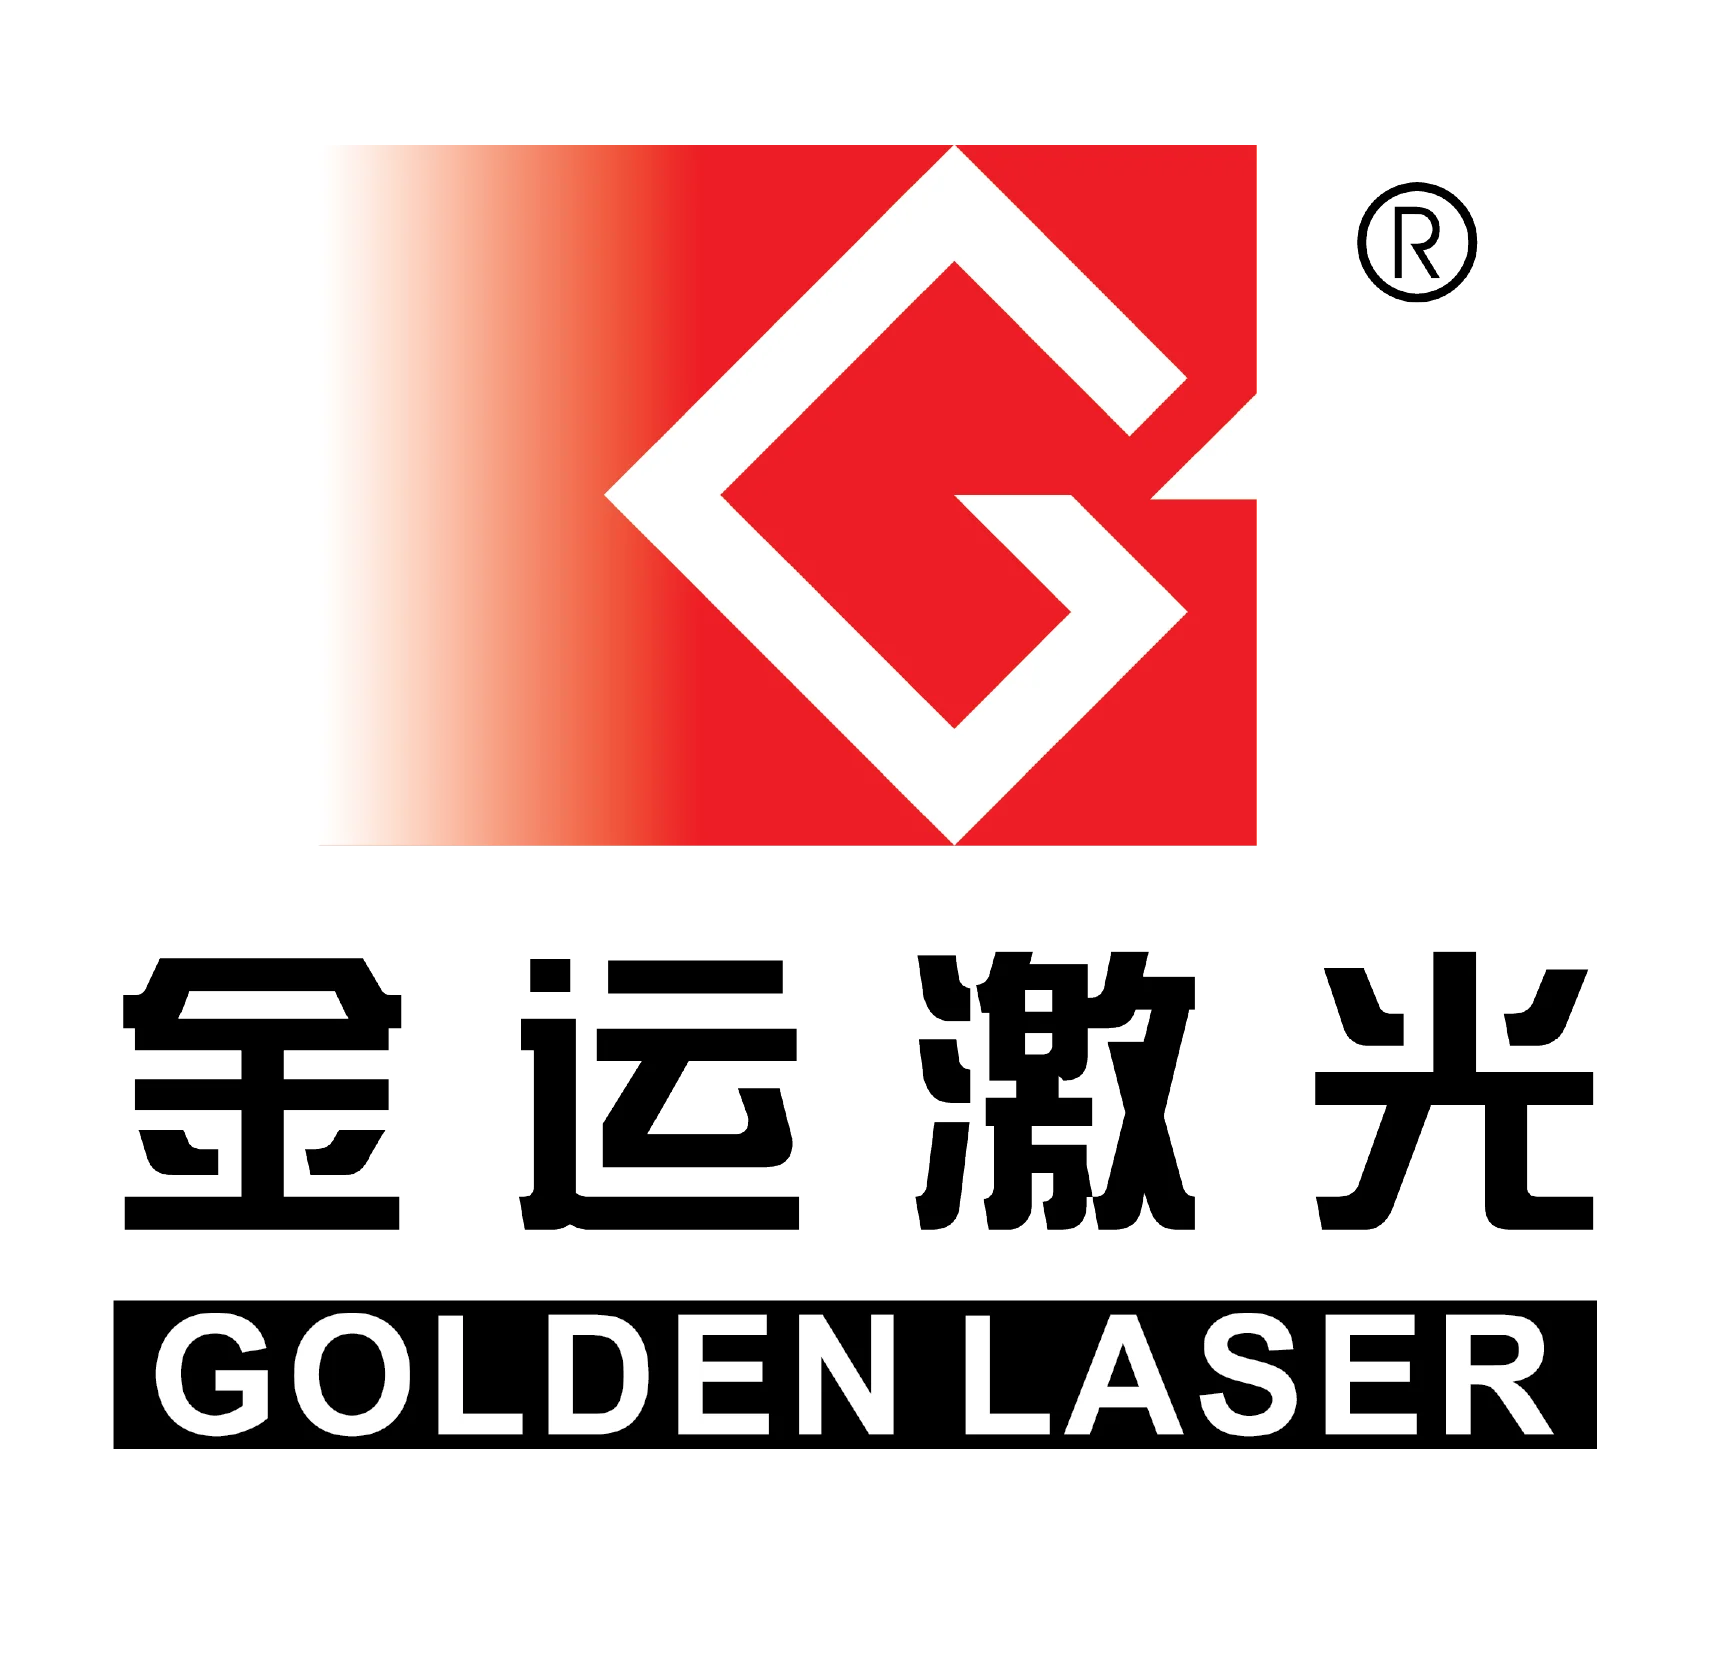 Large Area CO2 Laser Cutter for Acrylic Wood MDF - Goldenlaser